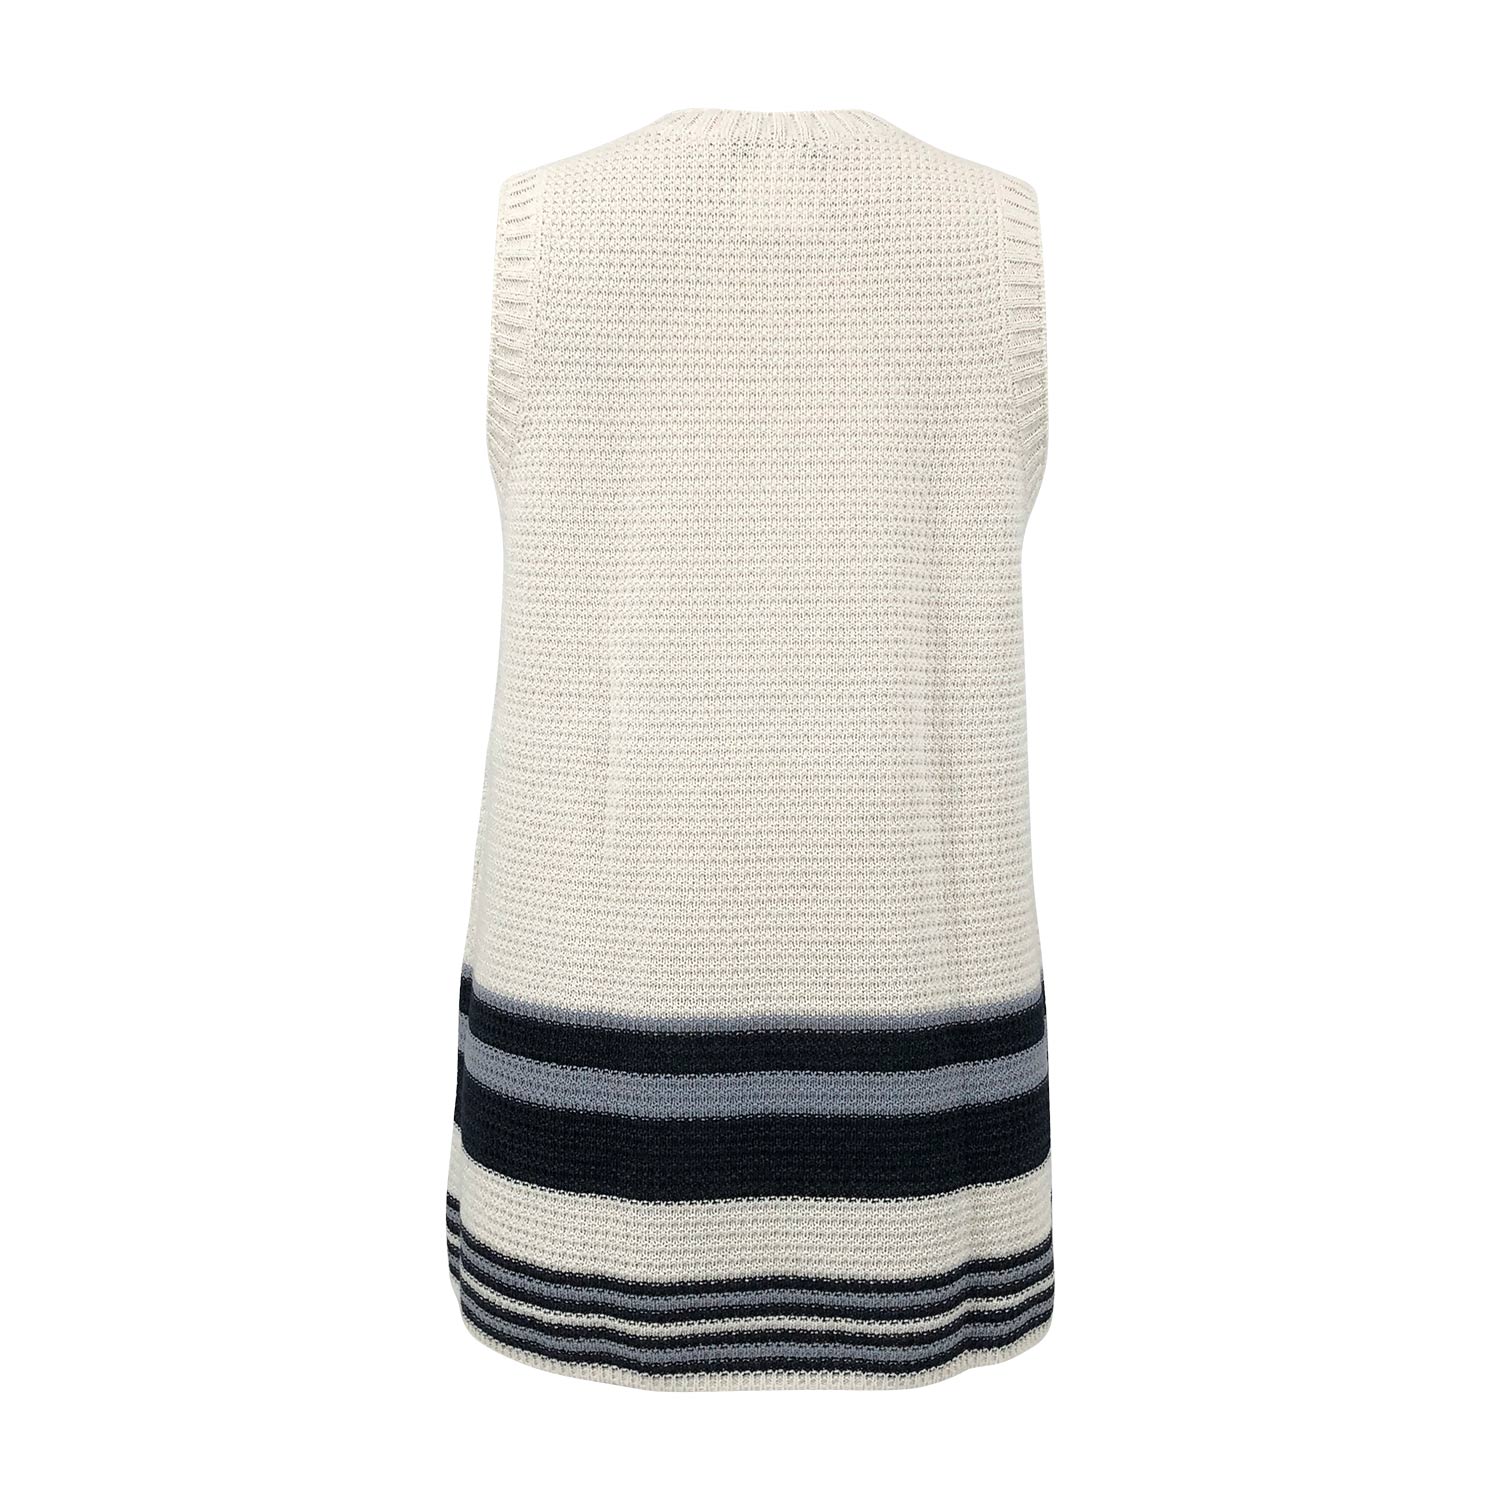 Chanel knitted tank top in cream cotton & silk with stripes